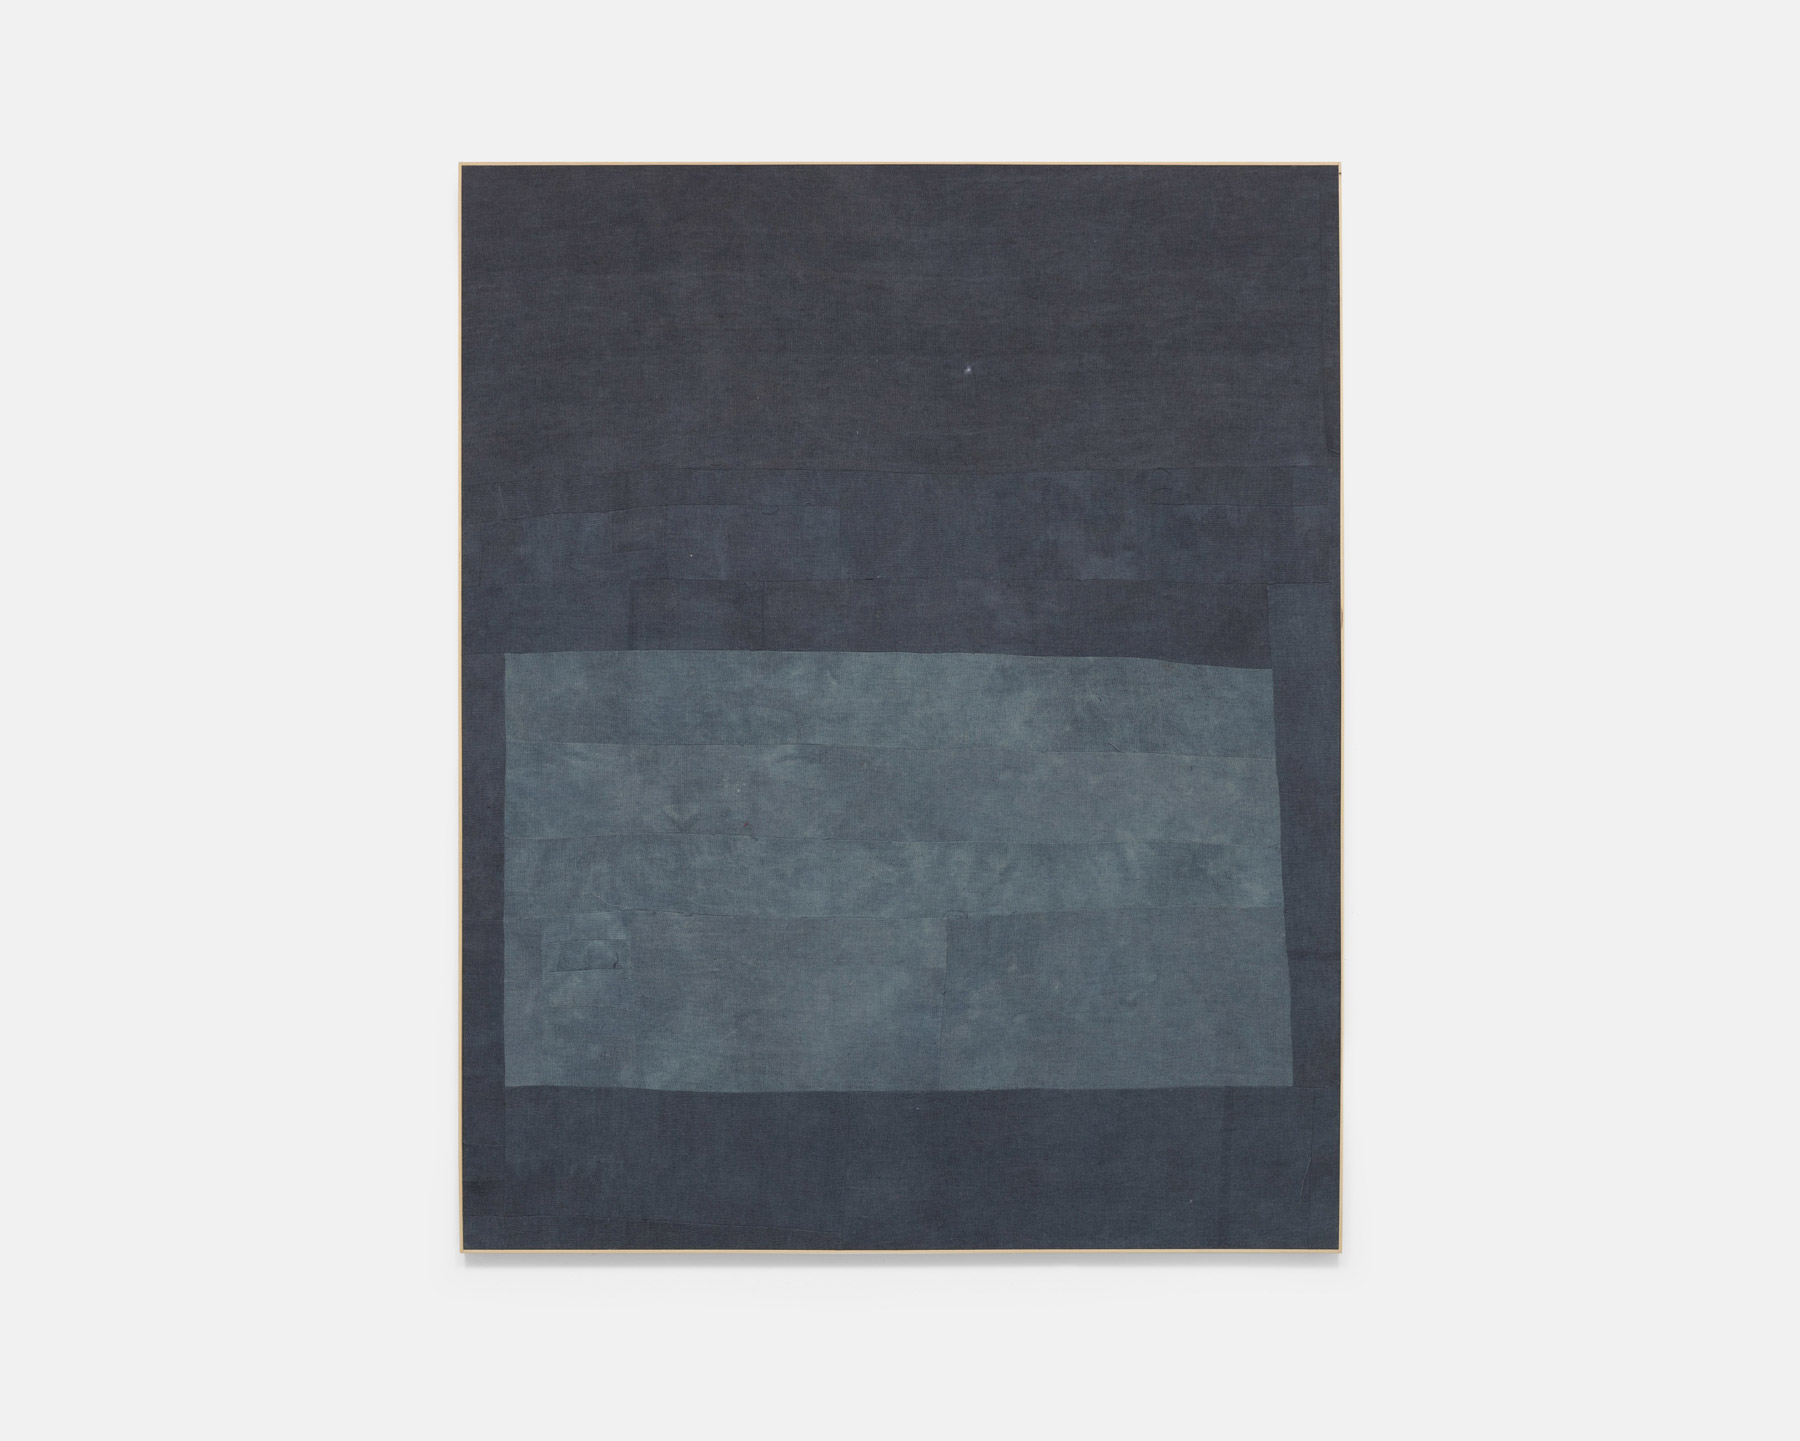 Lawrence Calver, Deep Blue, 2020, Dyed and stitched wool, 270 x 219 cm © The Artist, Image Courtesy Simchowitz Gallery